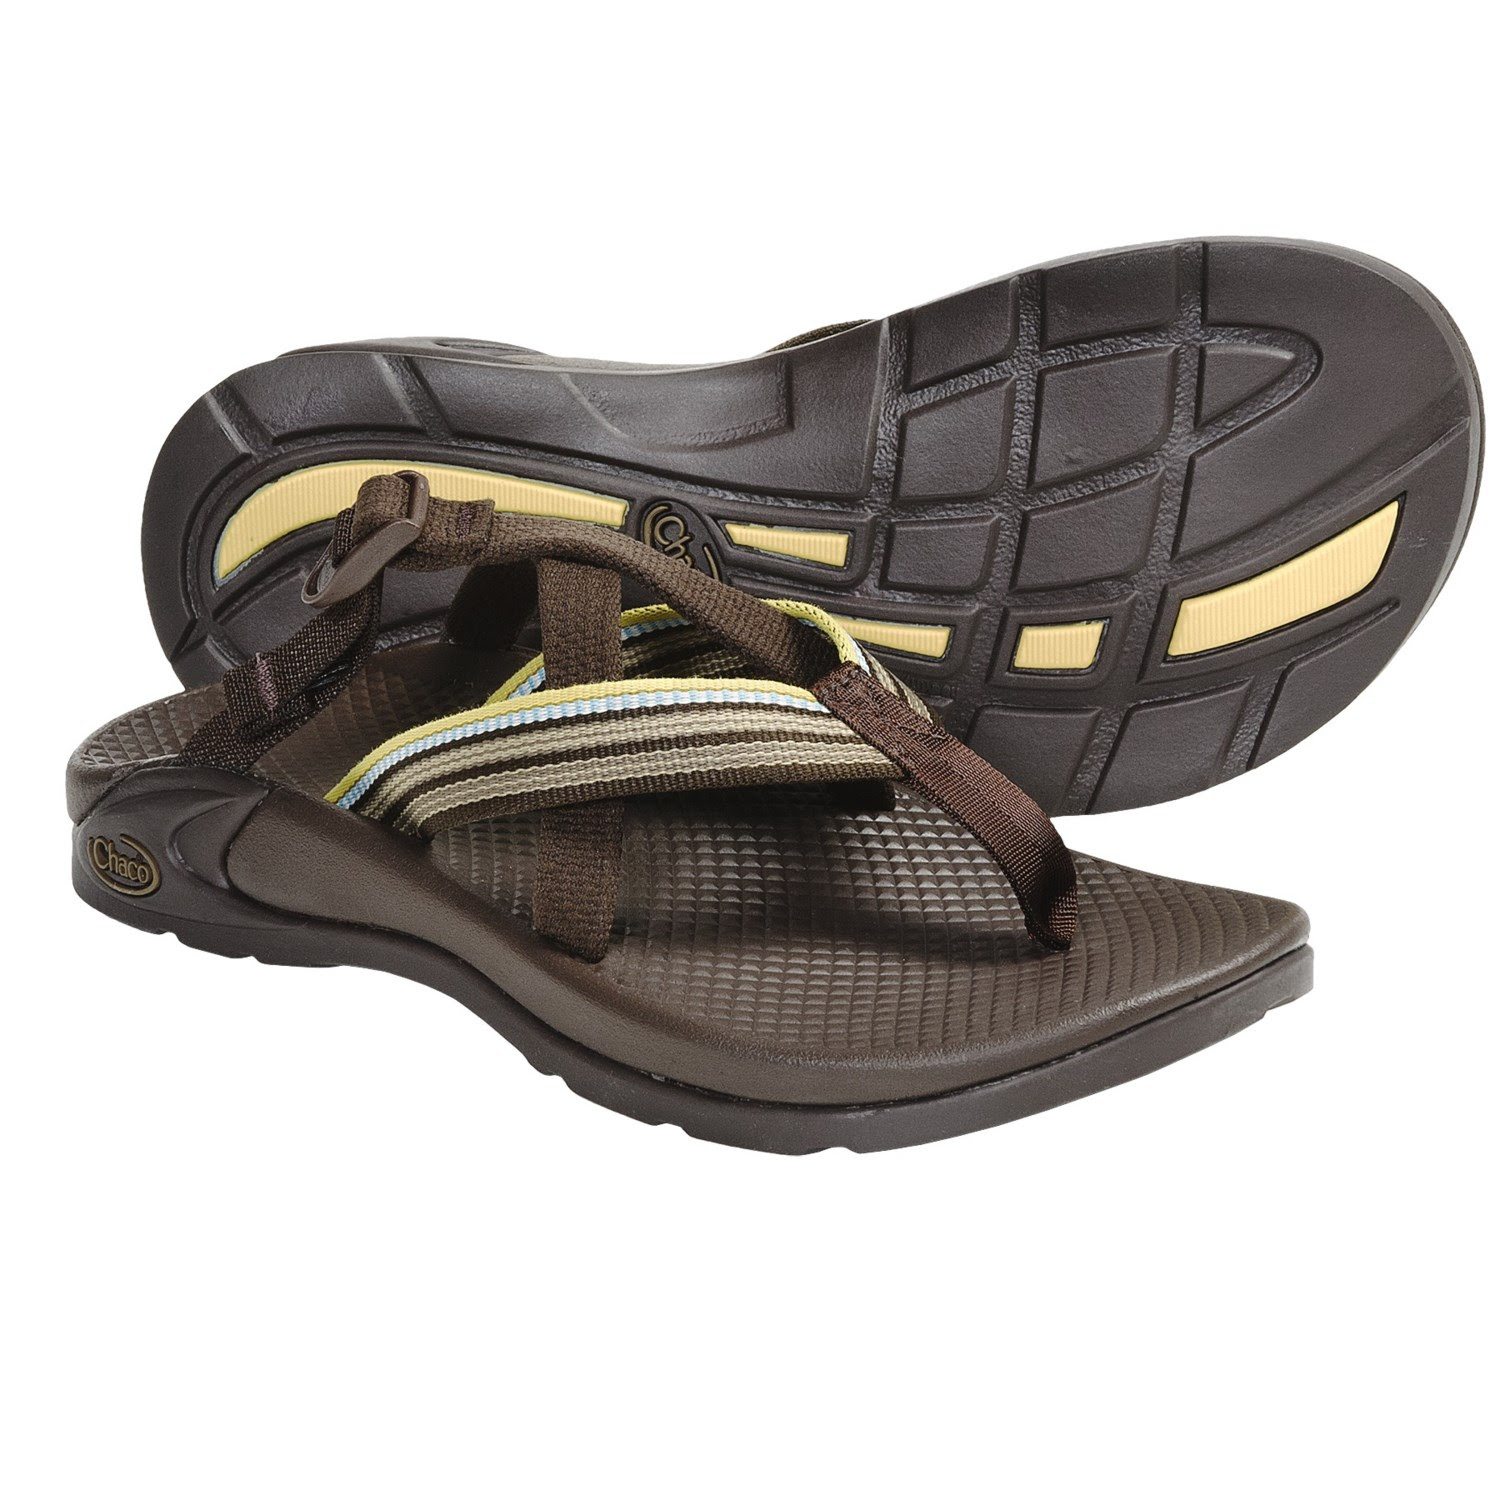  Chaco Sandals  Hipthong Outdoor Sandals 